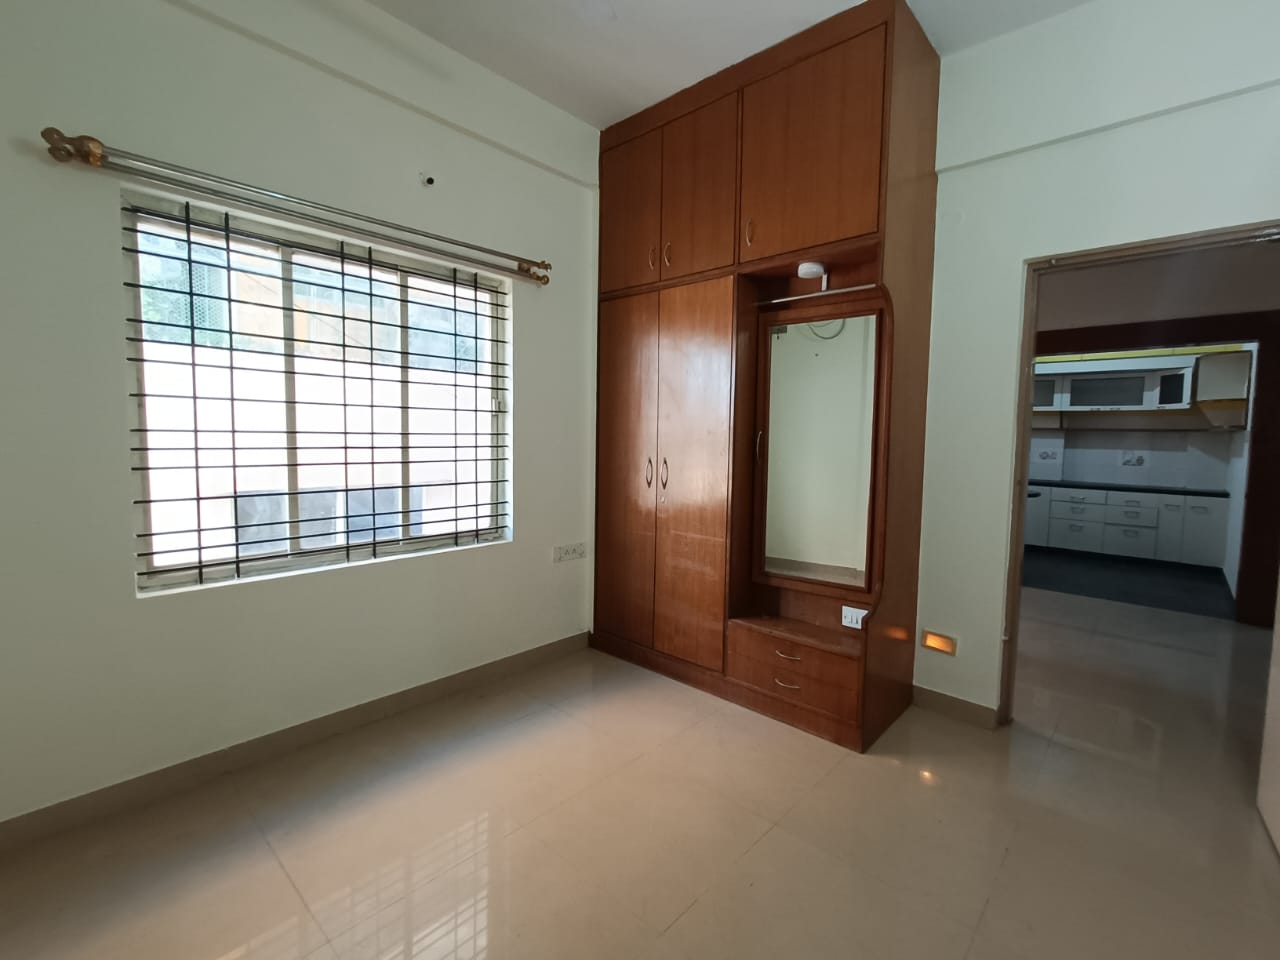 1 BHK Residential Apartment for Lease Only at JAM-7170-15Lakhs in Kempegowda Nagar